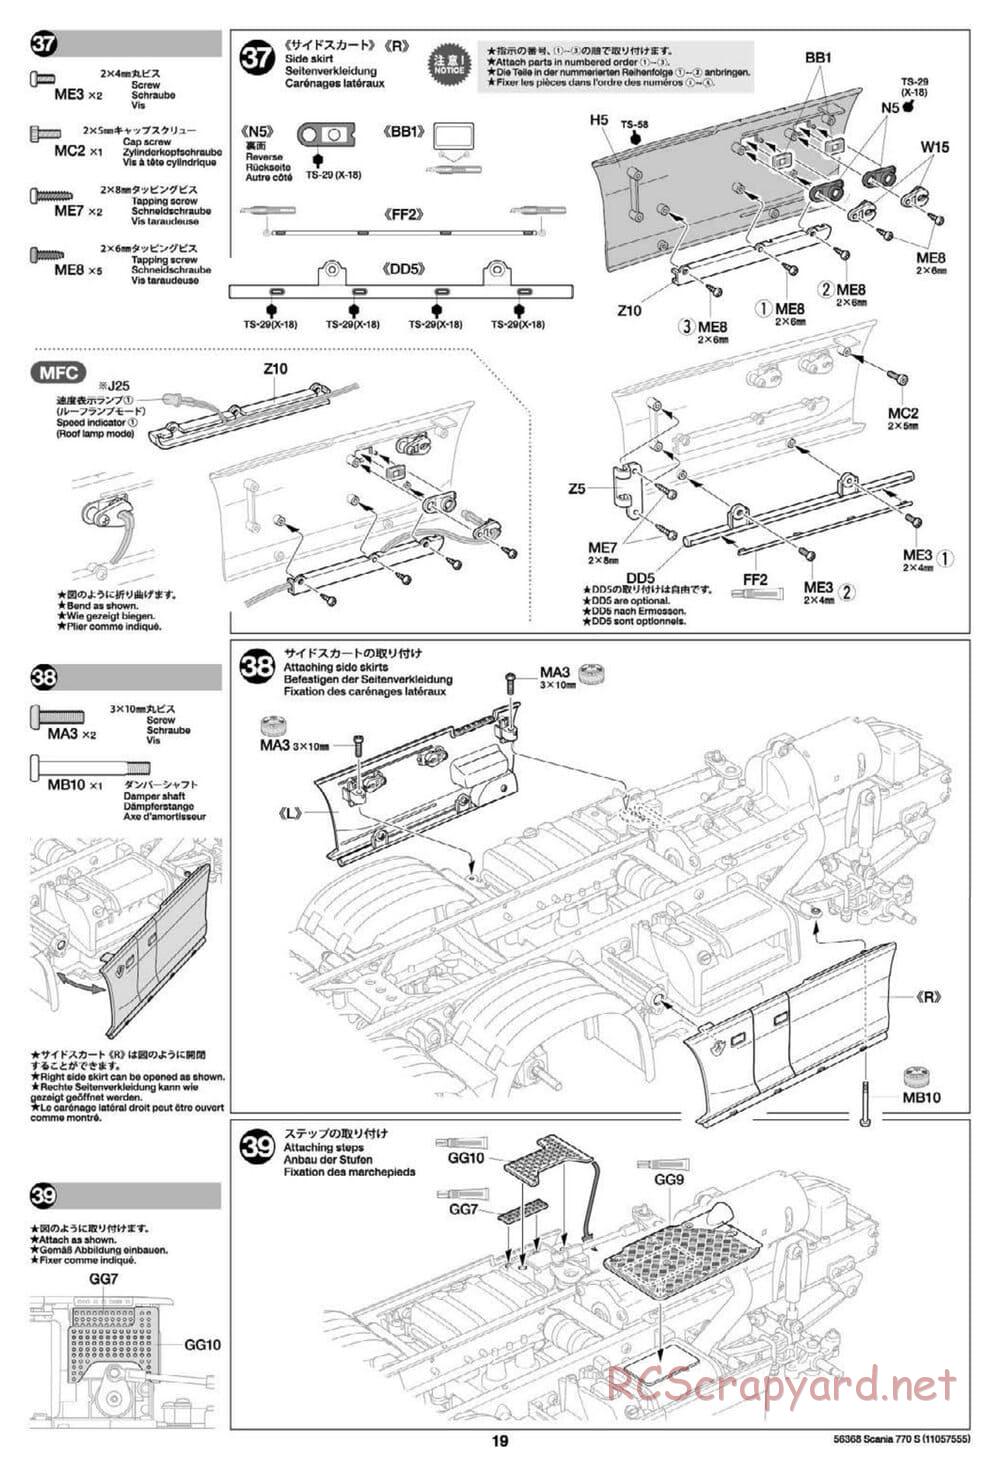 Tamiya - Scania 770S 6x4 Tractor Truck Chassis - Manual - Page 19